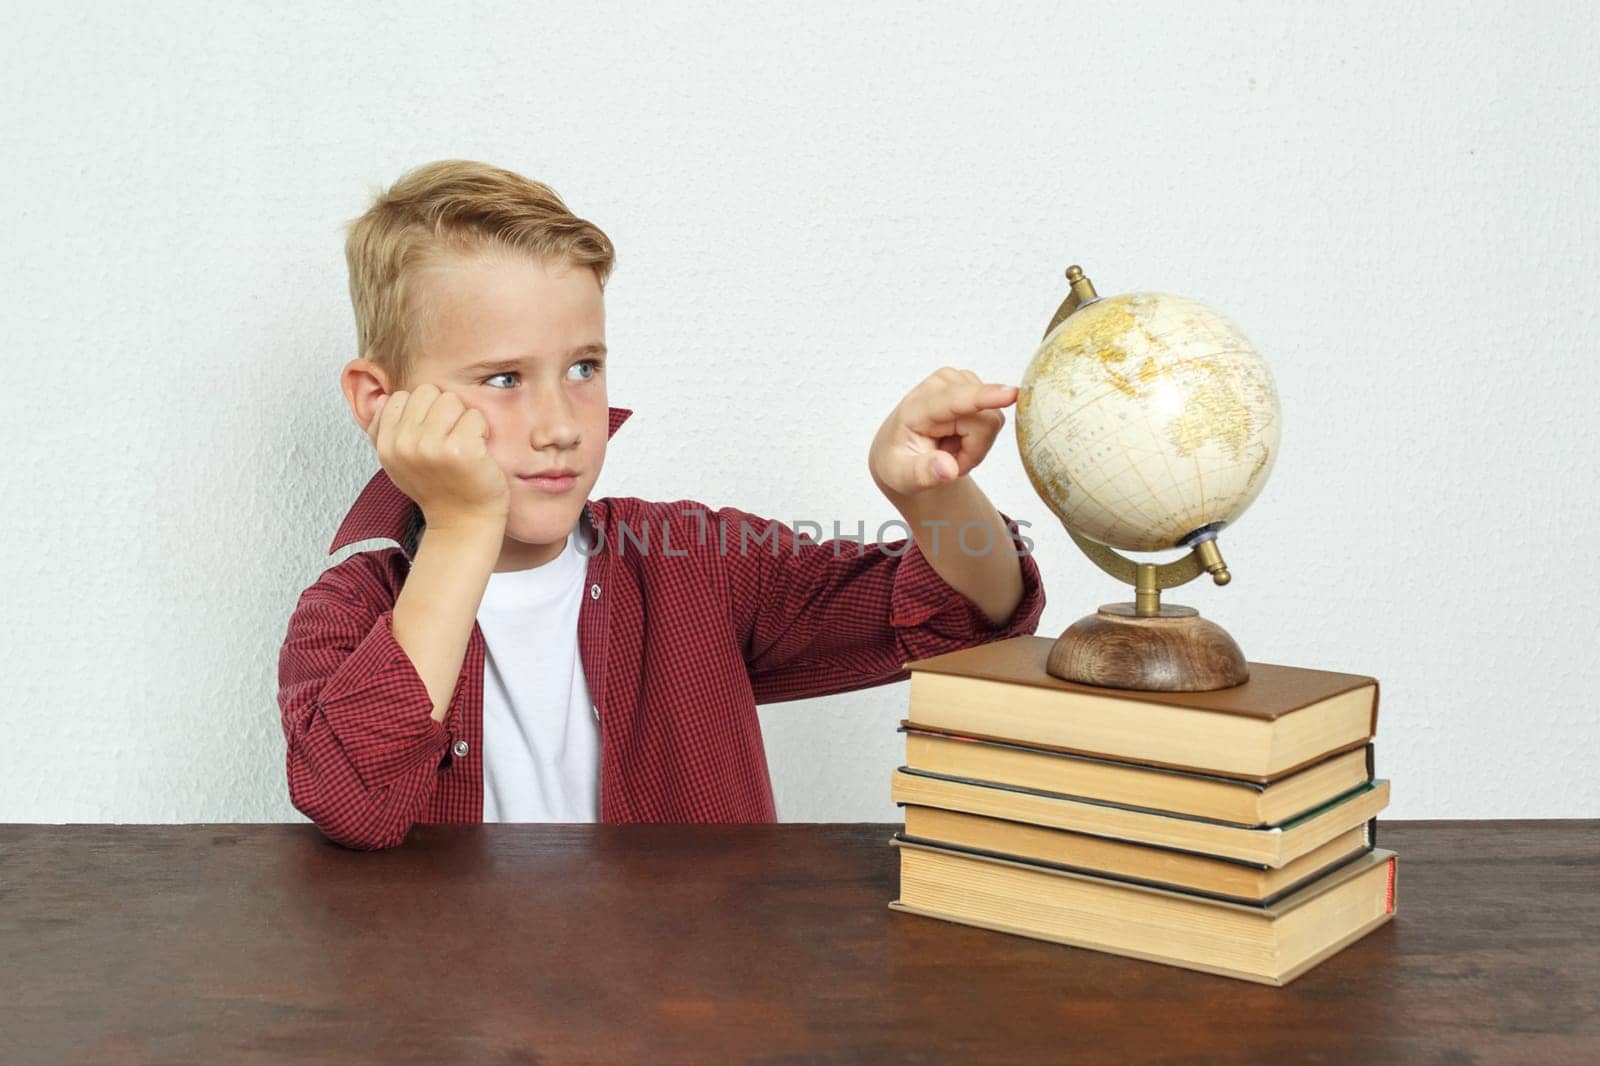 The schoolboy sits at the table, propping his head on his hand, points to the globe. On the table there are books, a globe and an alarm clock. by Sd28DimoN_1976